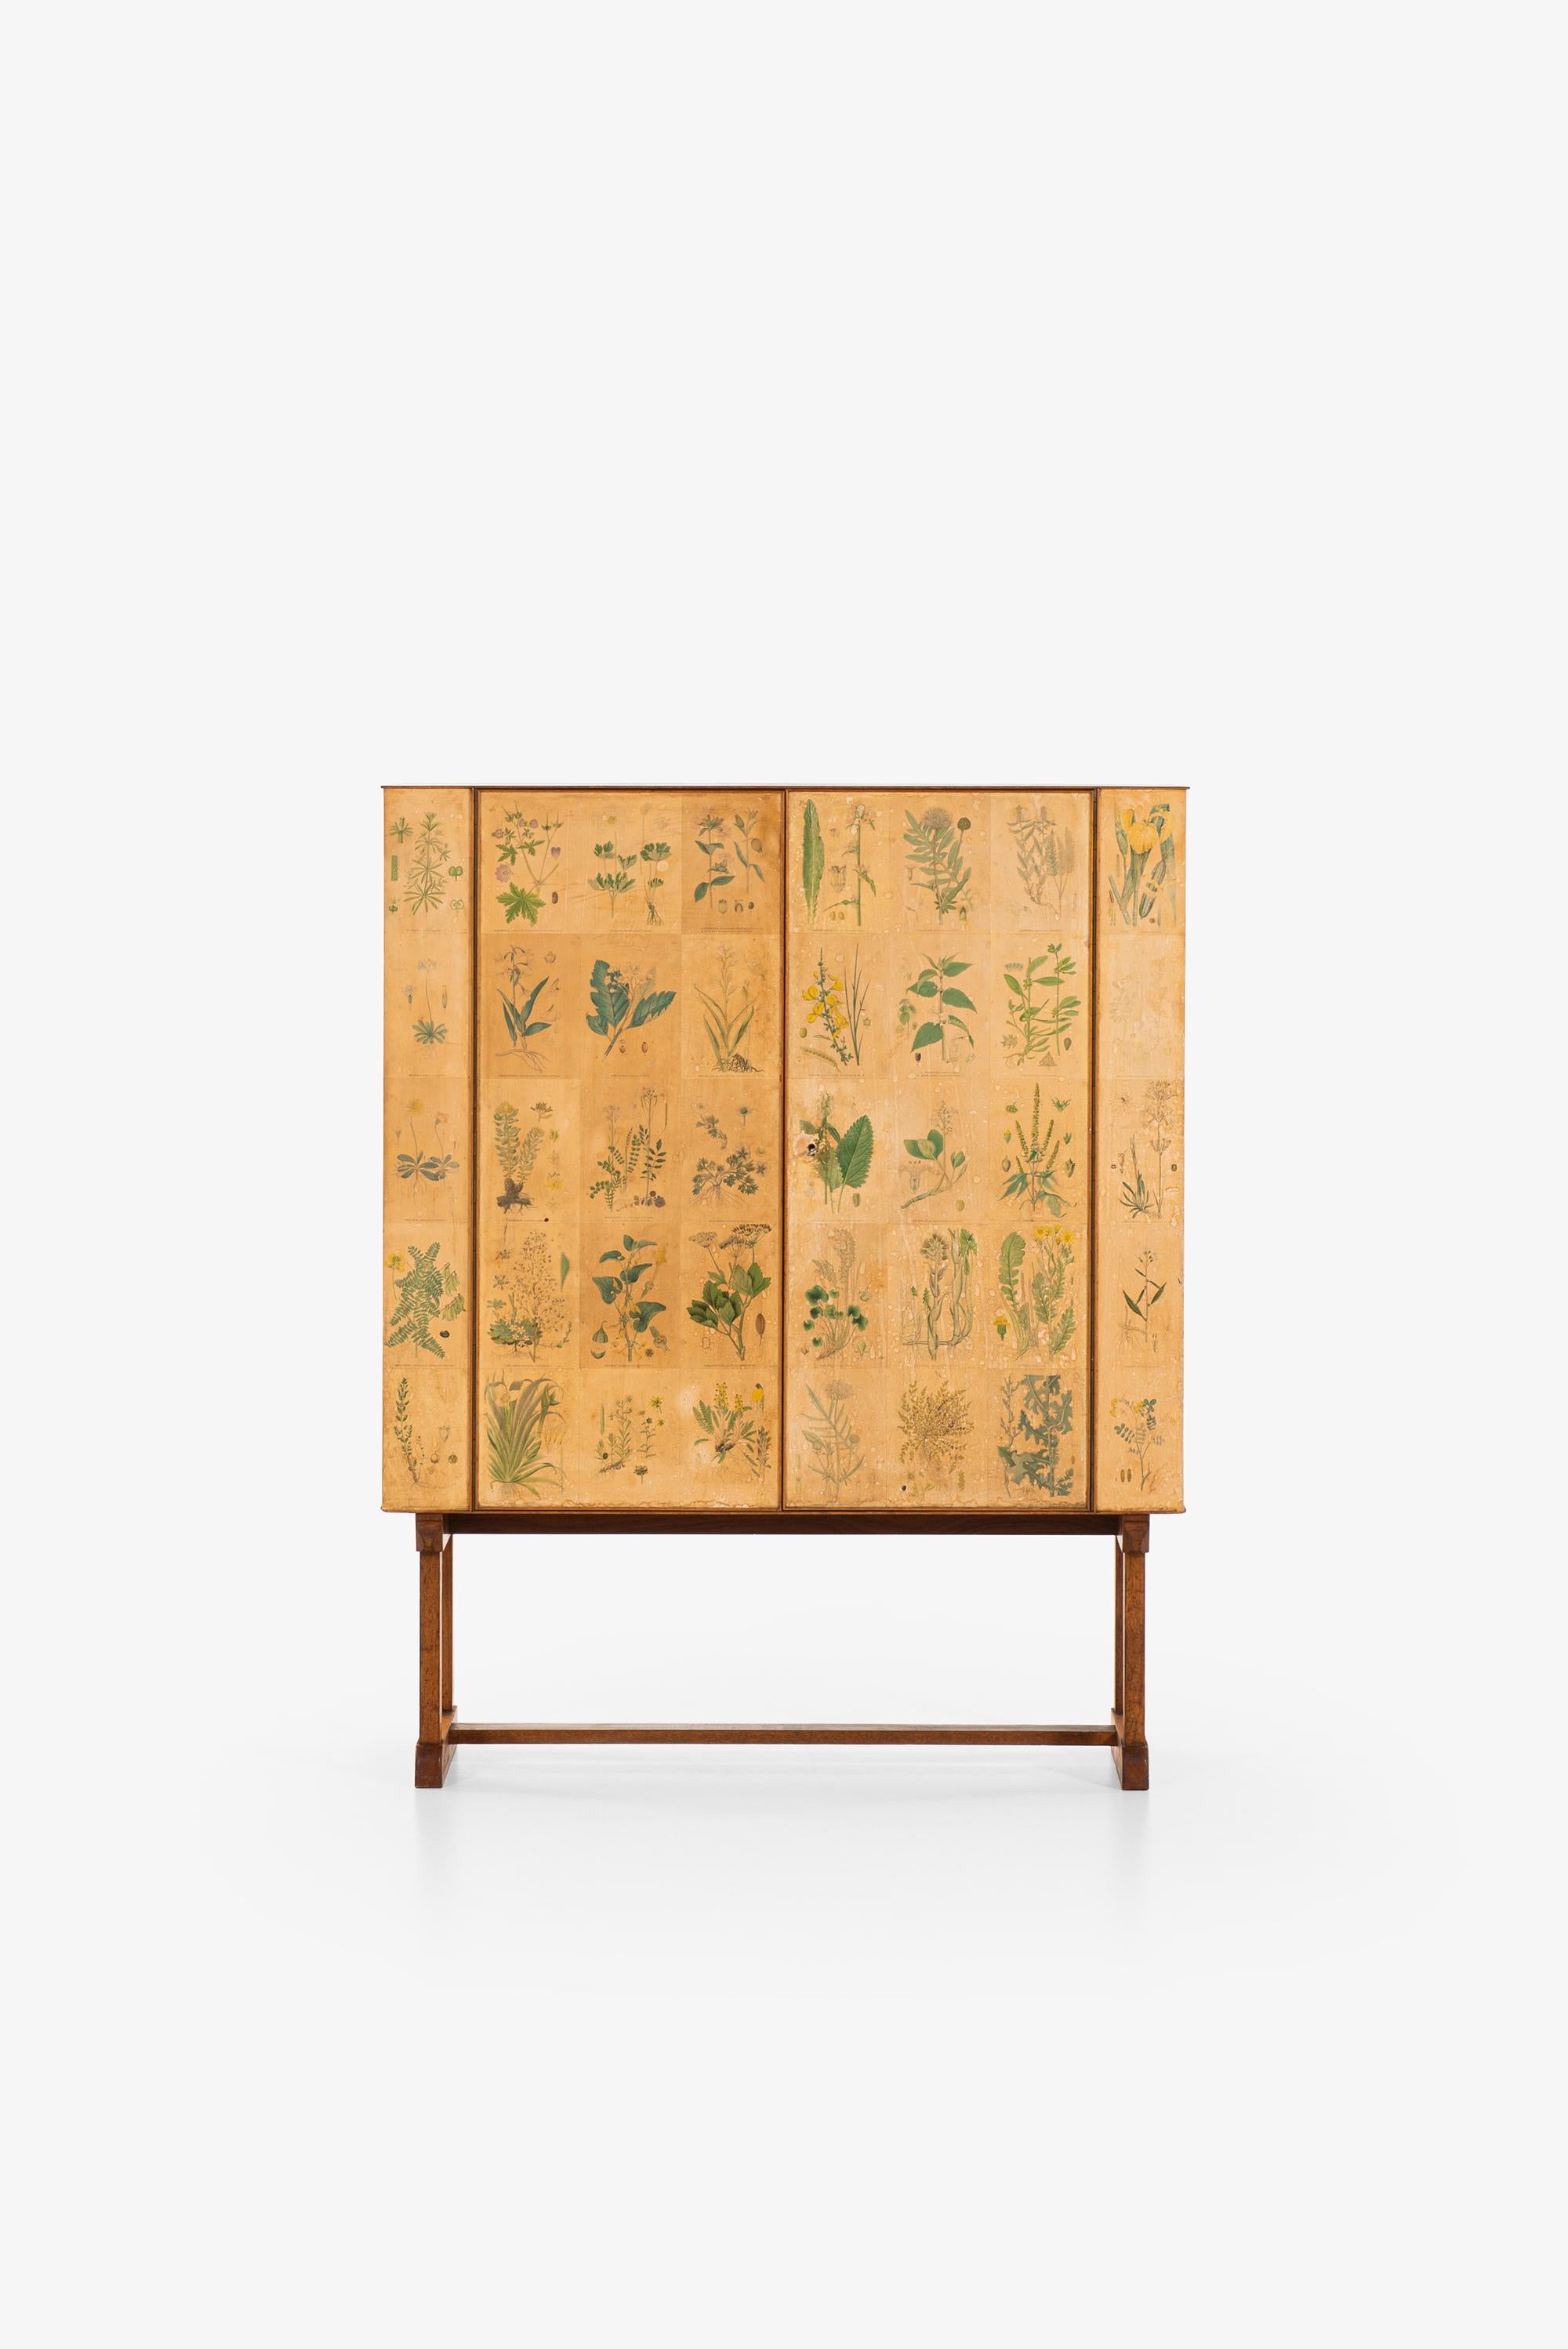 Very rare and early 1st edition of Flora / model 852 cabinet designed by Josef Frank. Produced by Svenskt Tenn in Sweden.